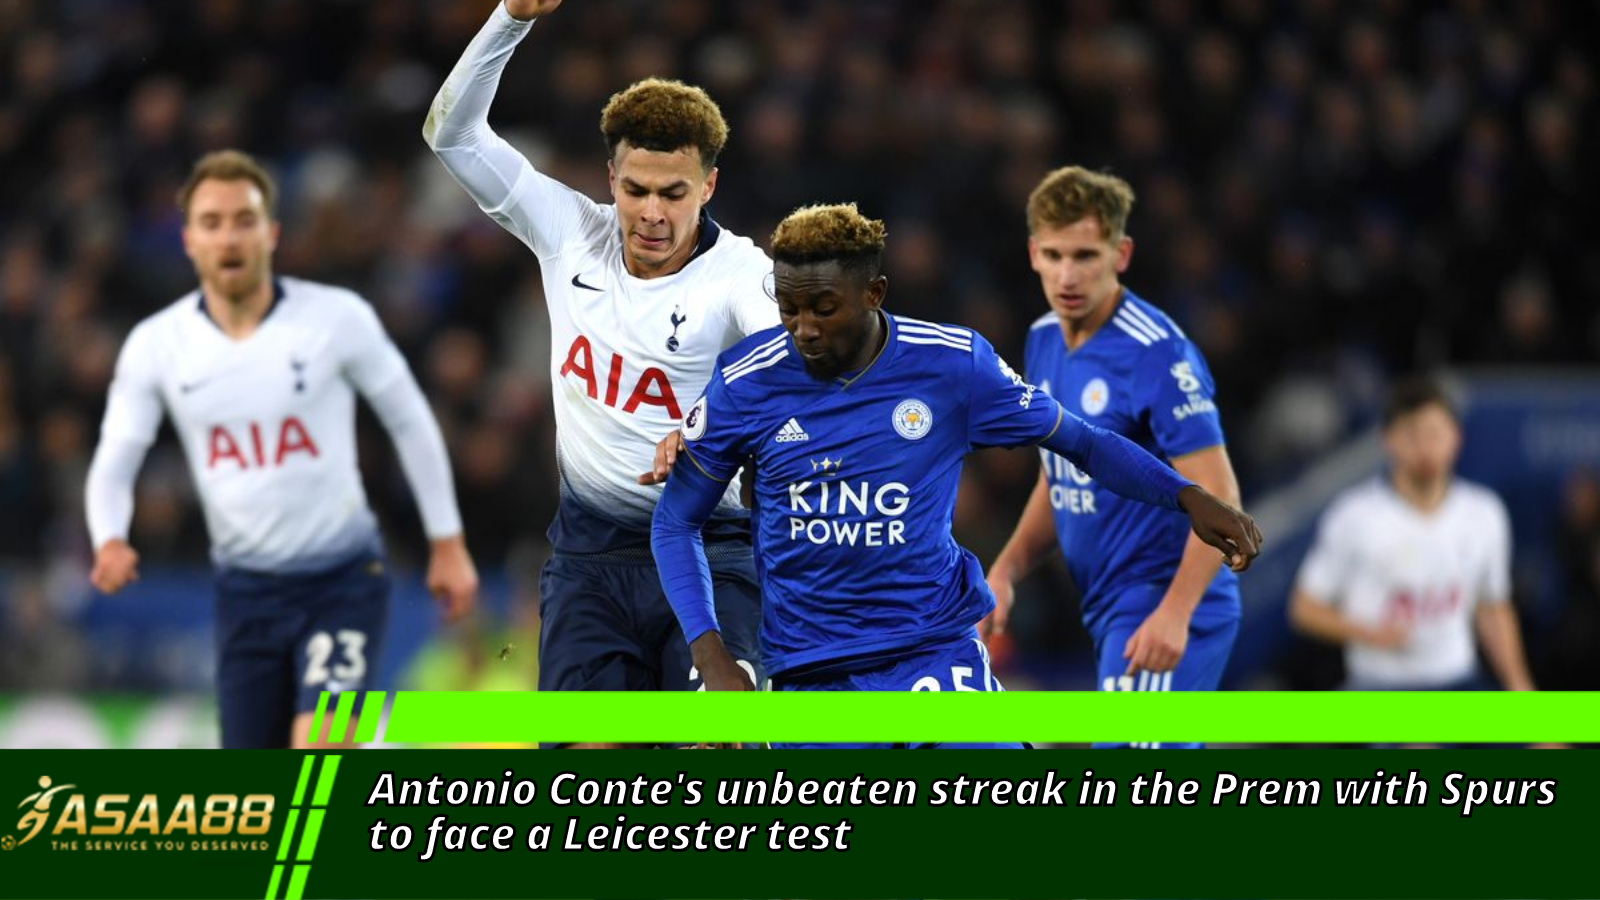 Antonio Conte's unbeaten streak in the Prem with Spurs to face a Leicester test